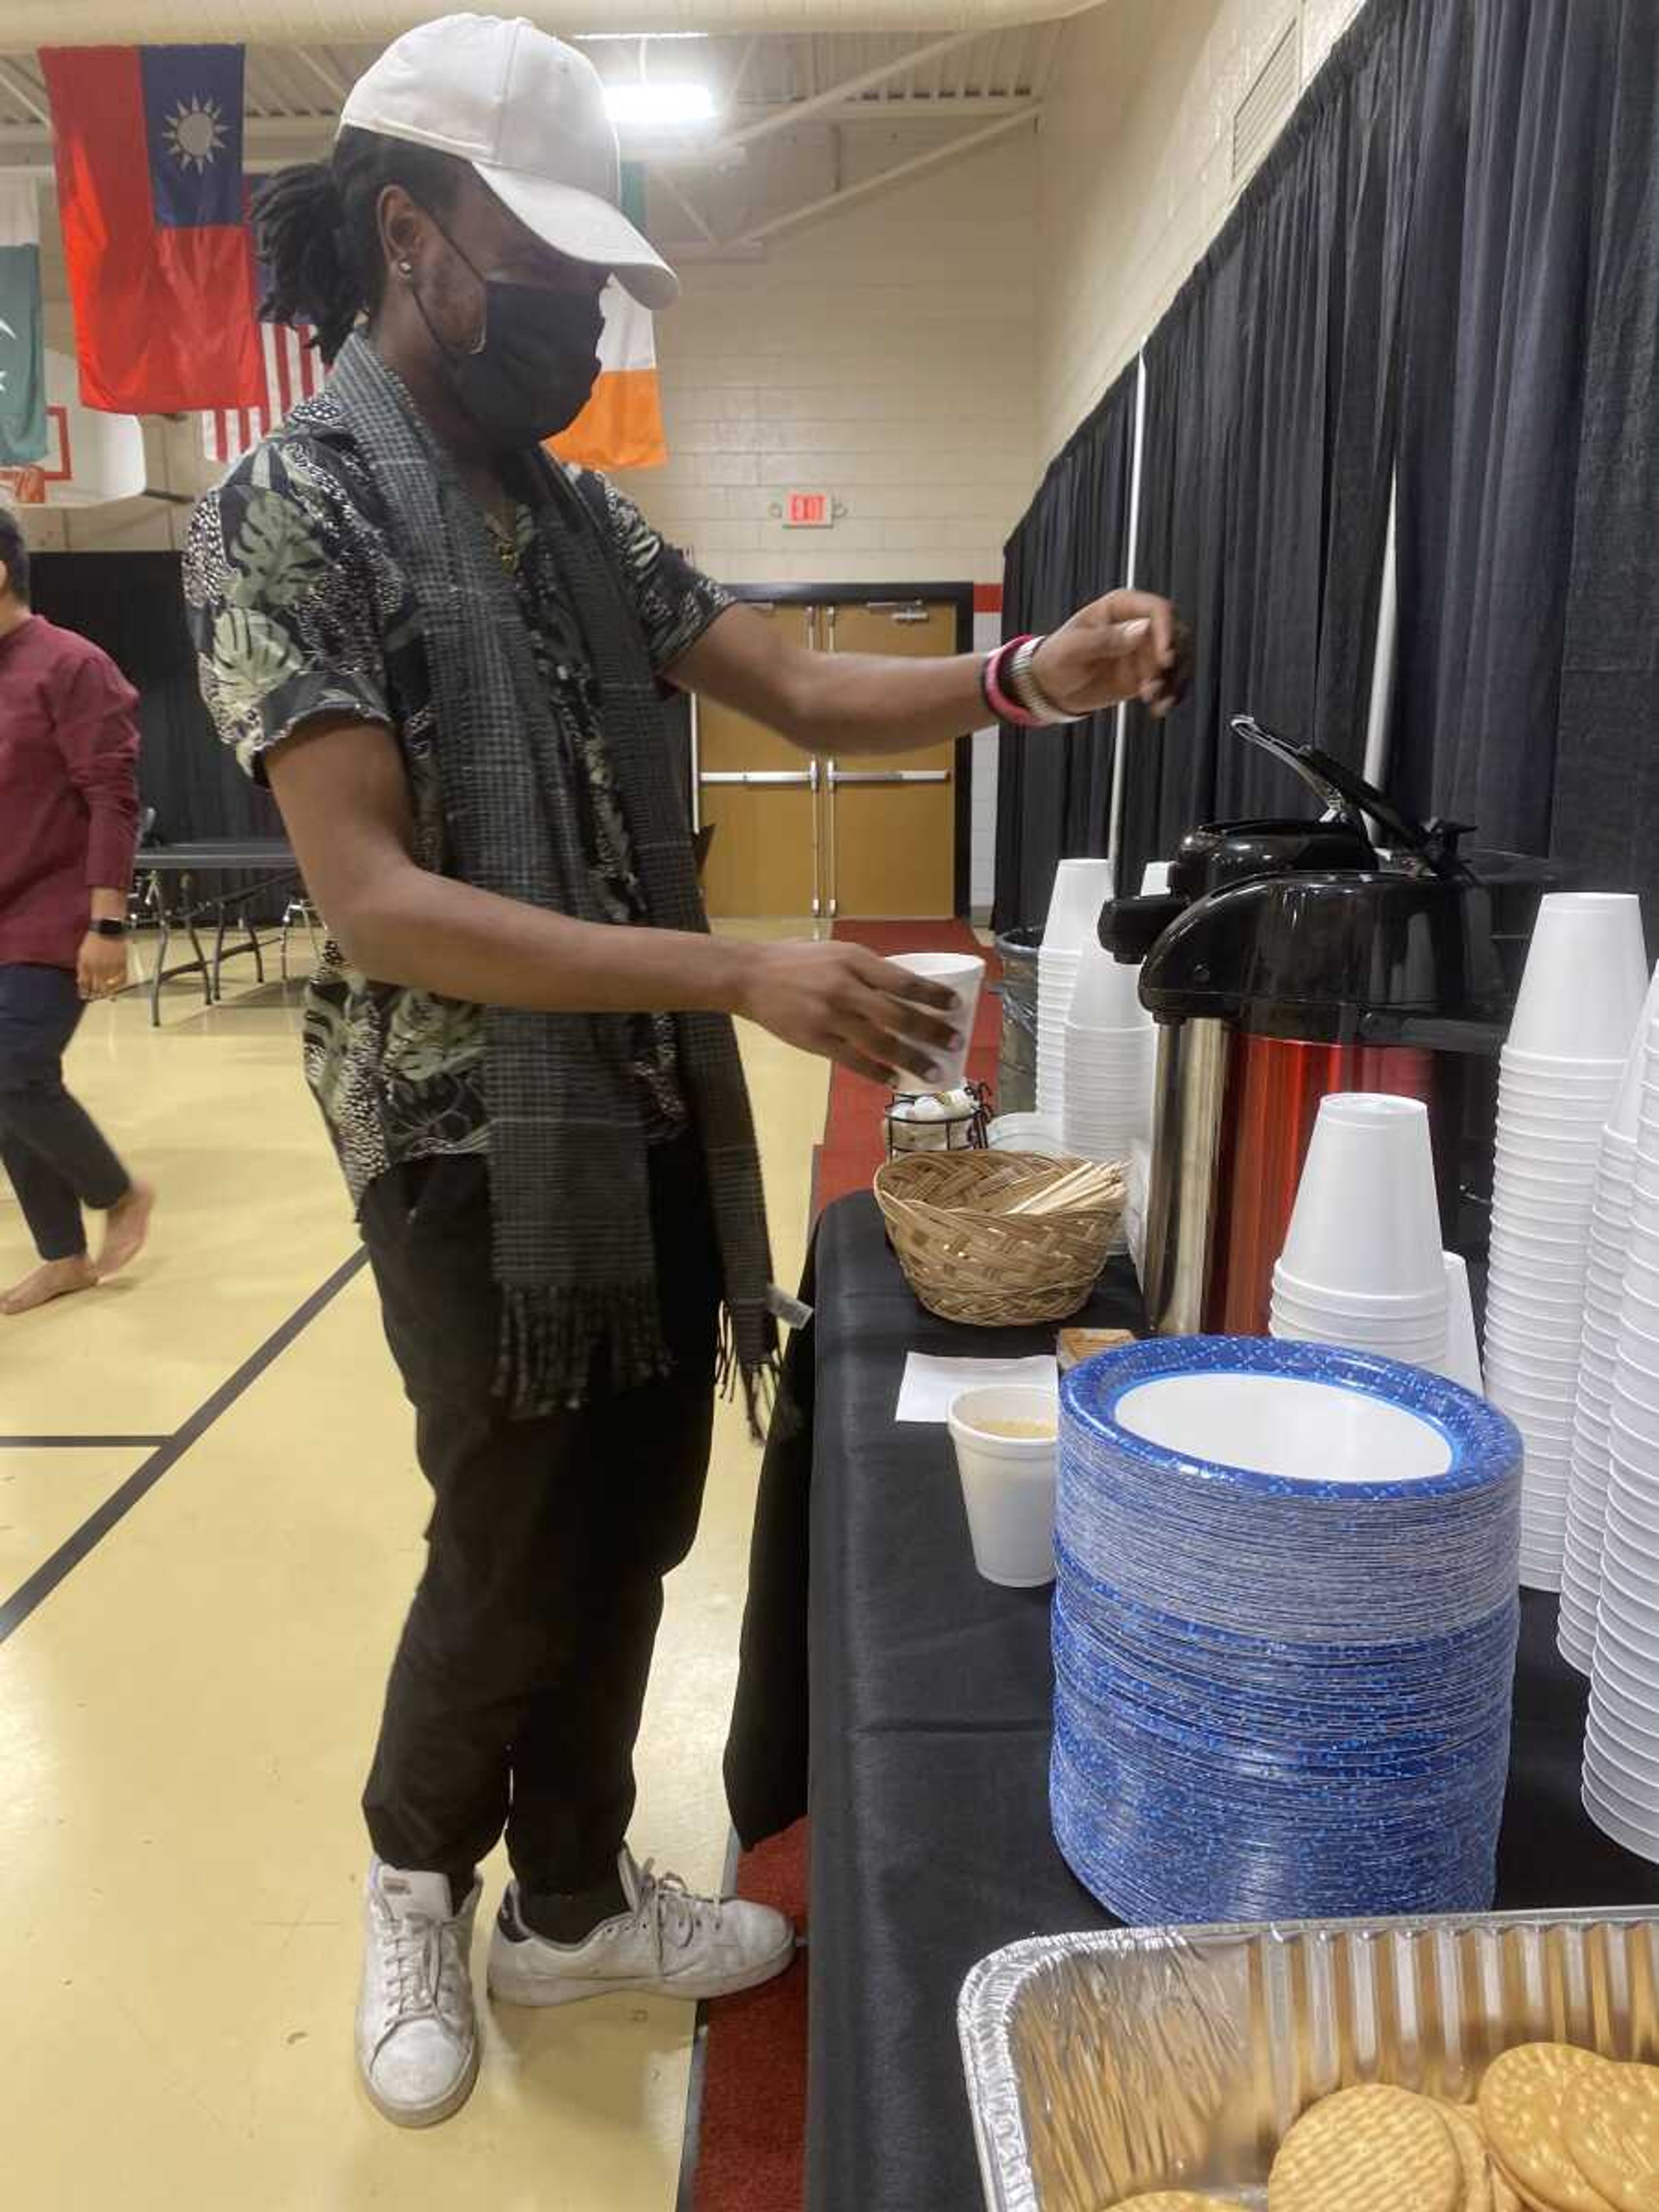 Mechanical engineer senior Elvis Maina enjoyed a cup of Indian tea at the "High Tea at the IV" event on Friday, Sept. 10.